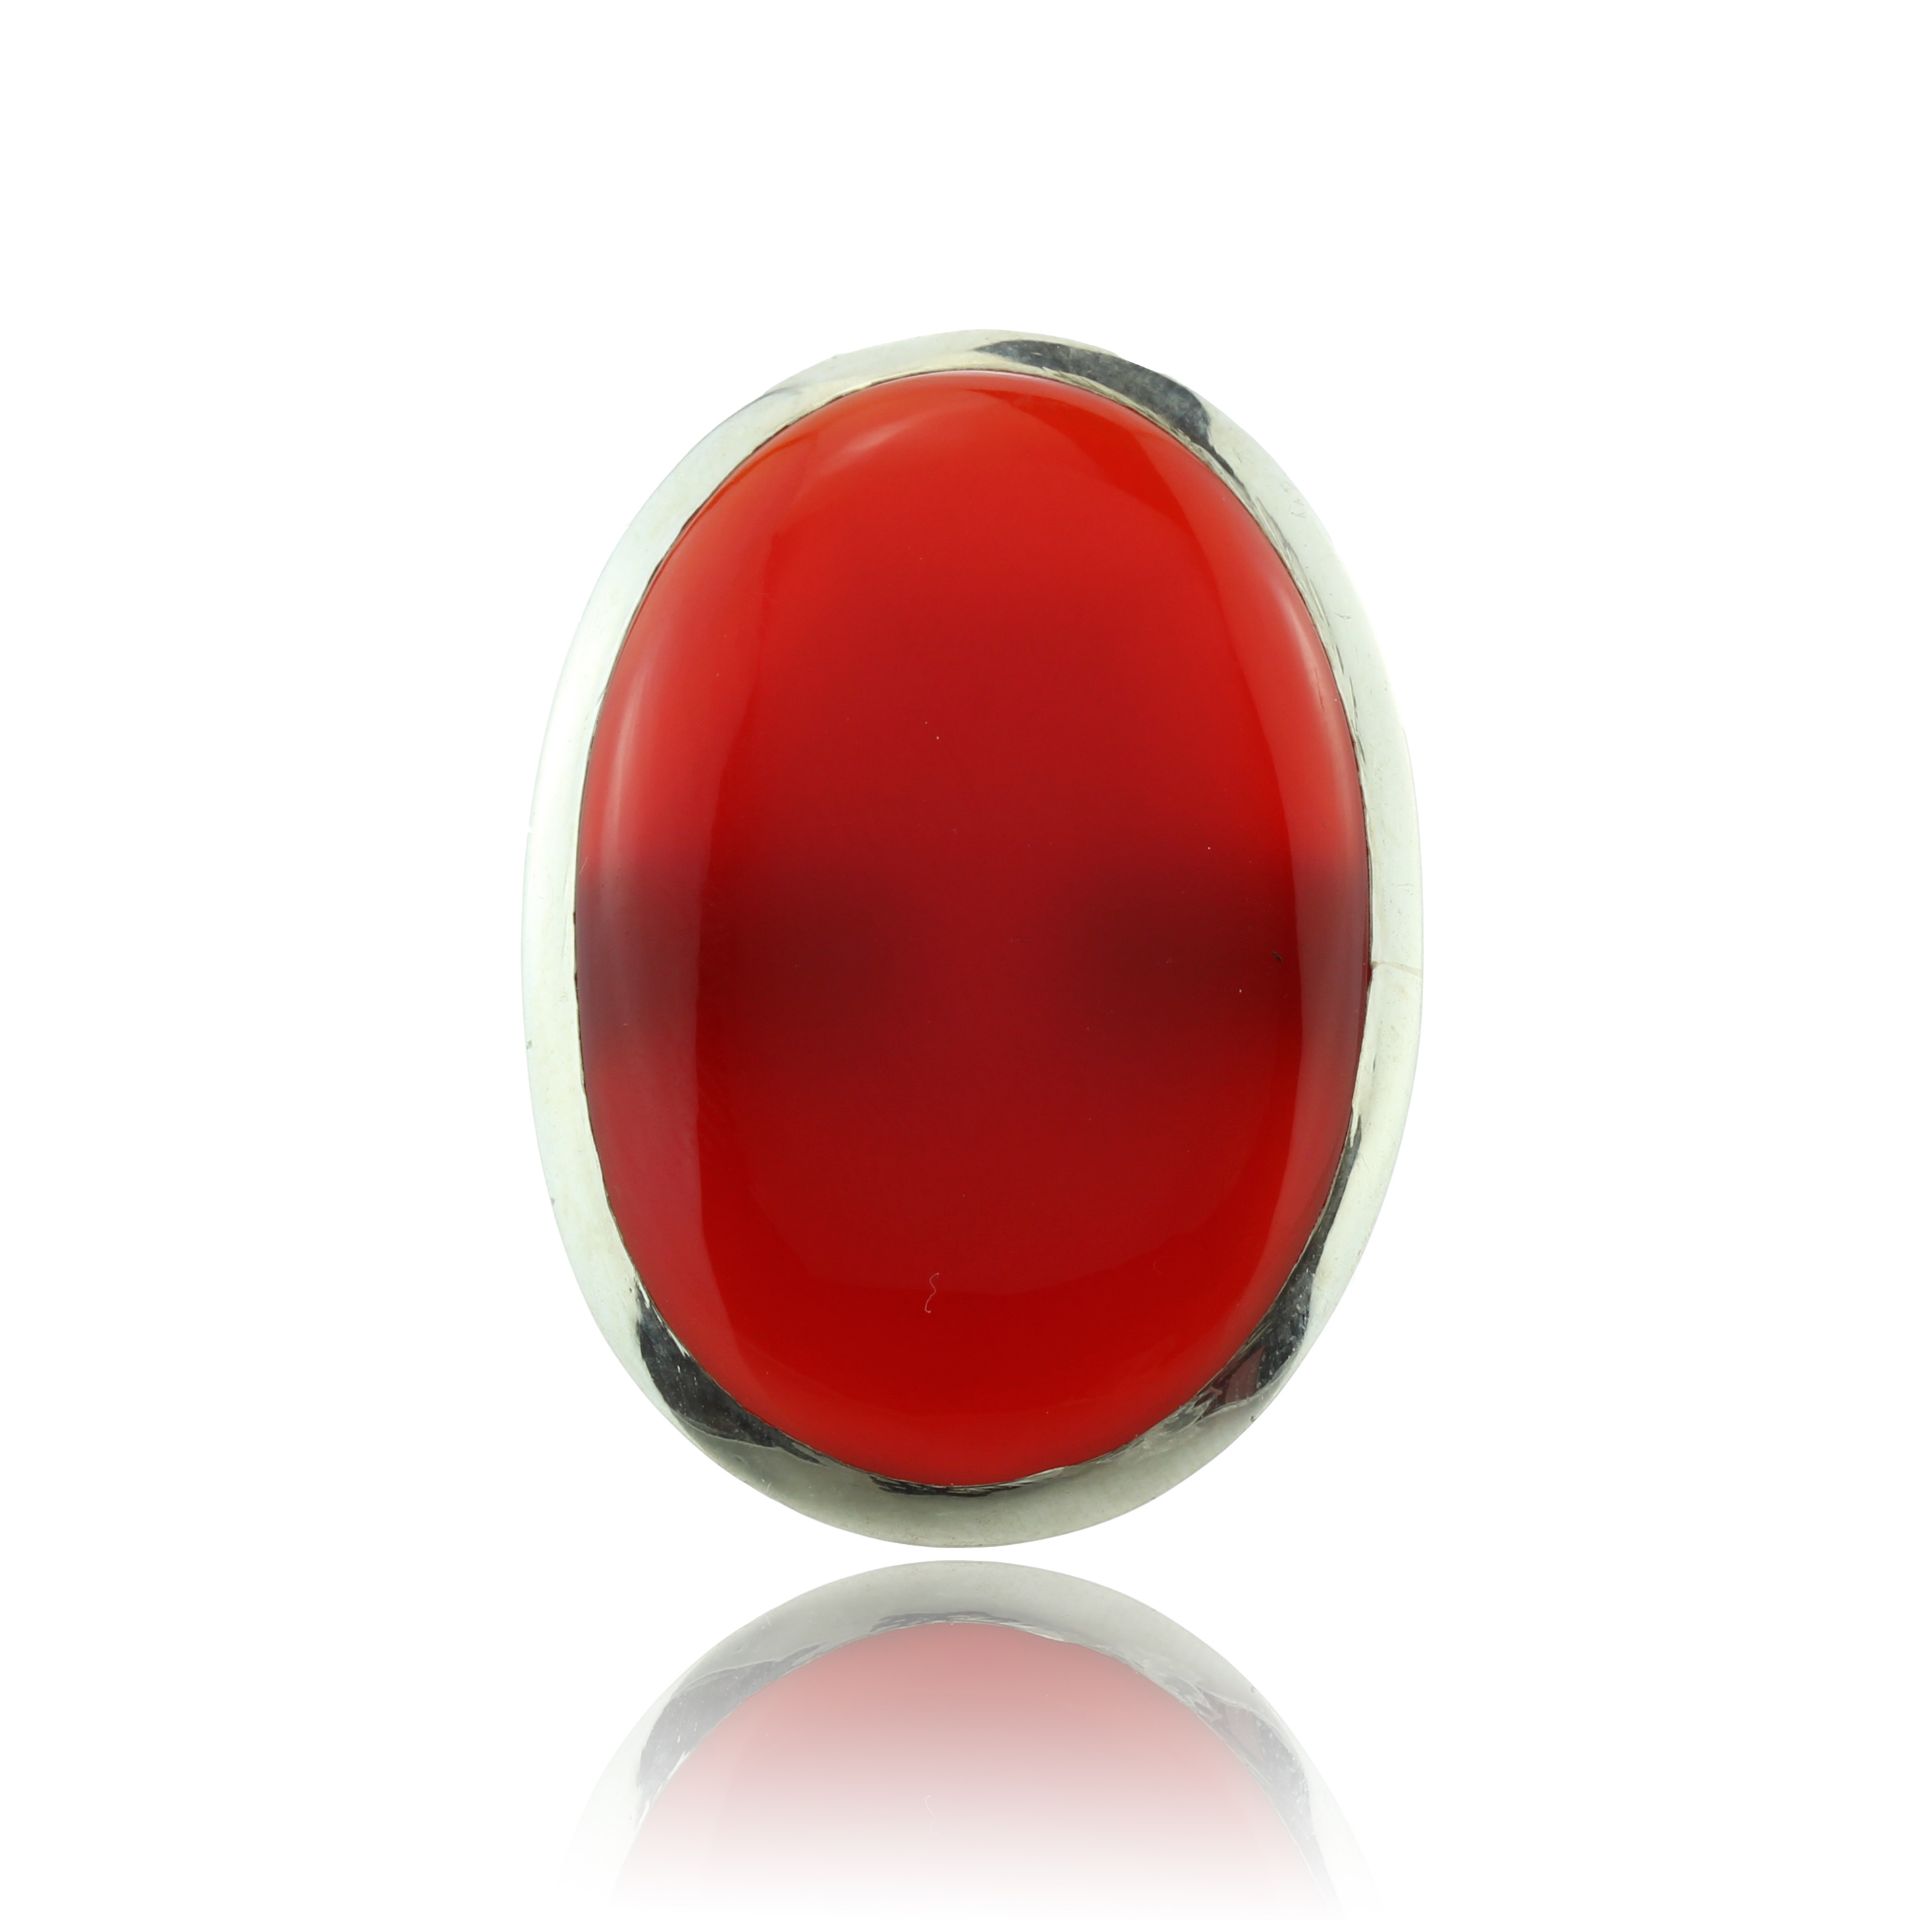 A large carnelian dress ring in sterling silver set with a large oval carnelian cabochon measuring